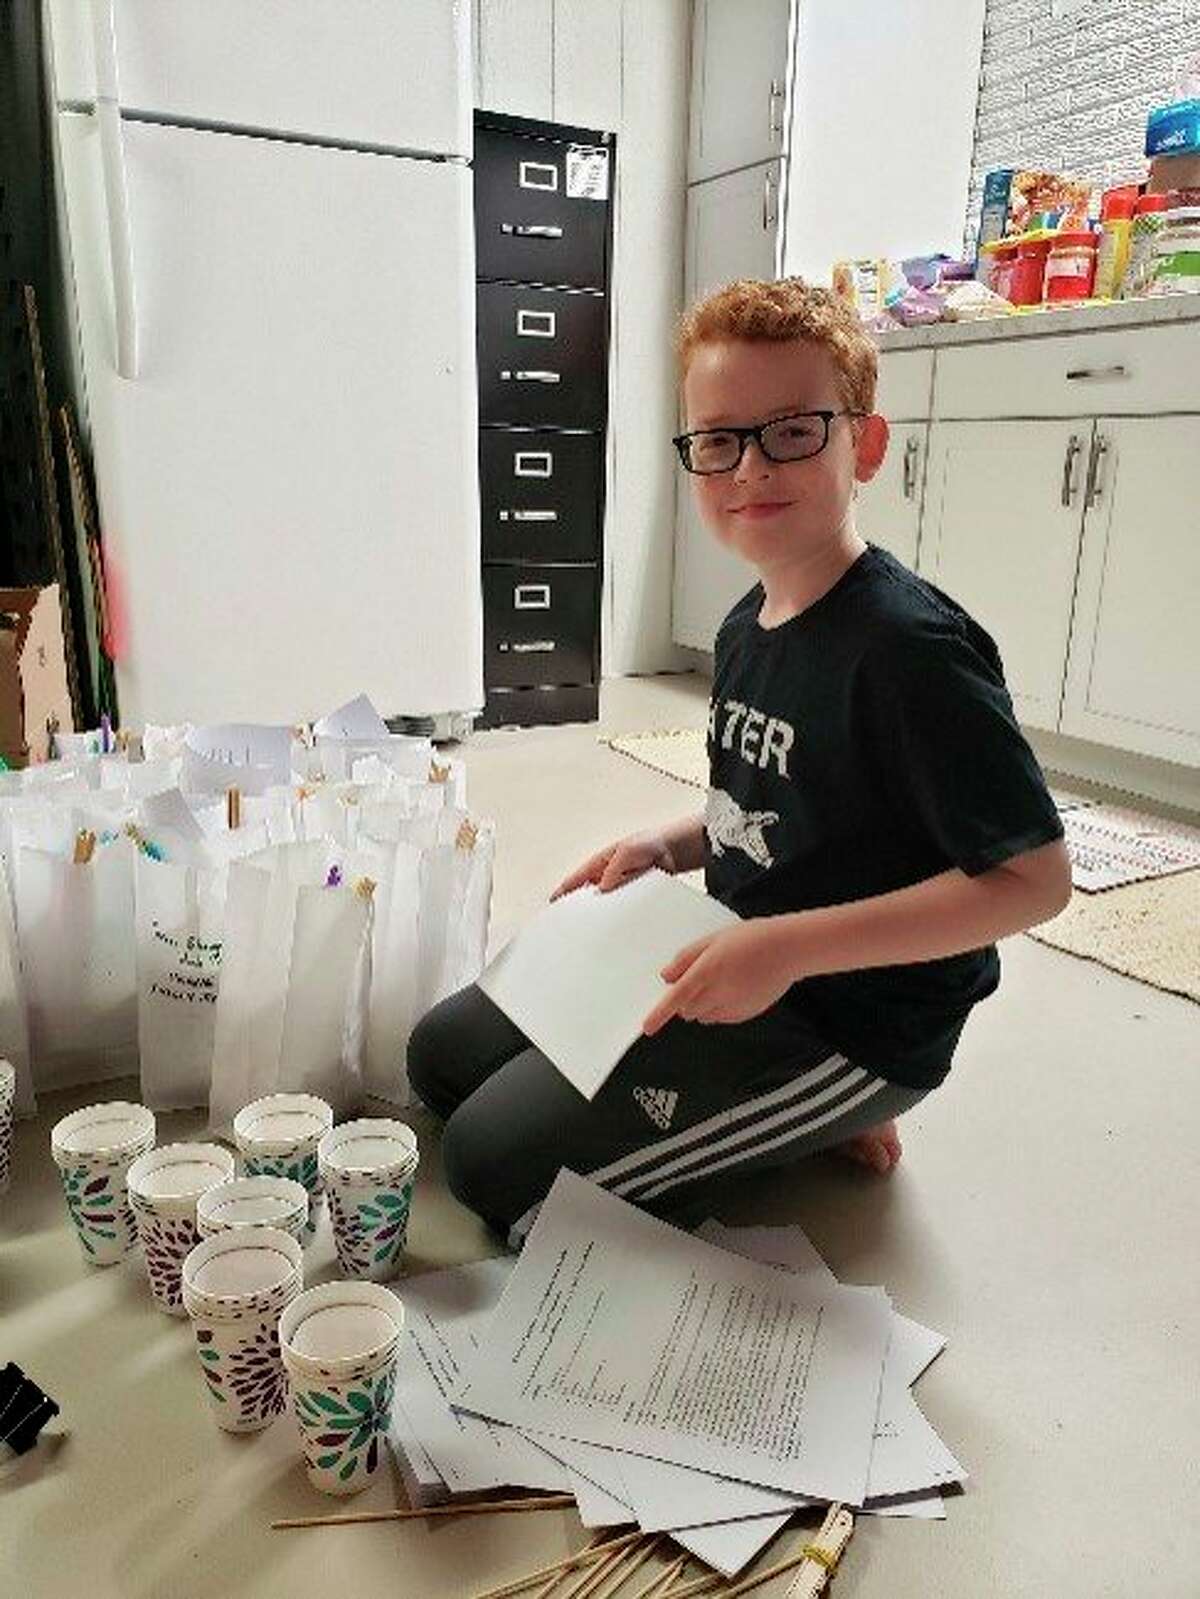 Sixth-grader Hayden Rozewski is St. John's 2020-2021 Chief Science Officer. Together with his parents, Chuck and Stephanie Rozewski, they developed and produced five at-home STEM projects. (Photos Provided)